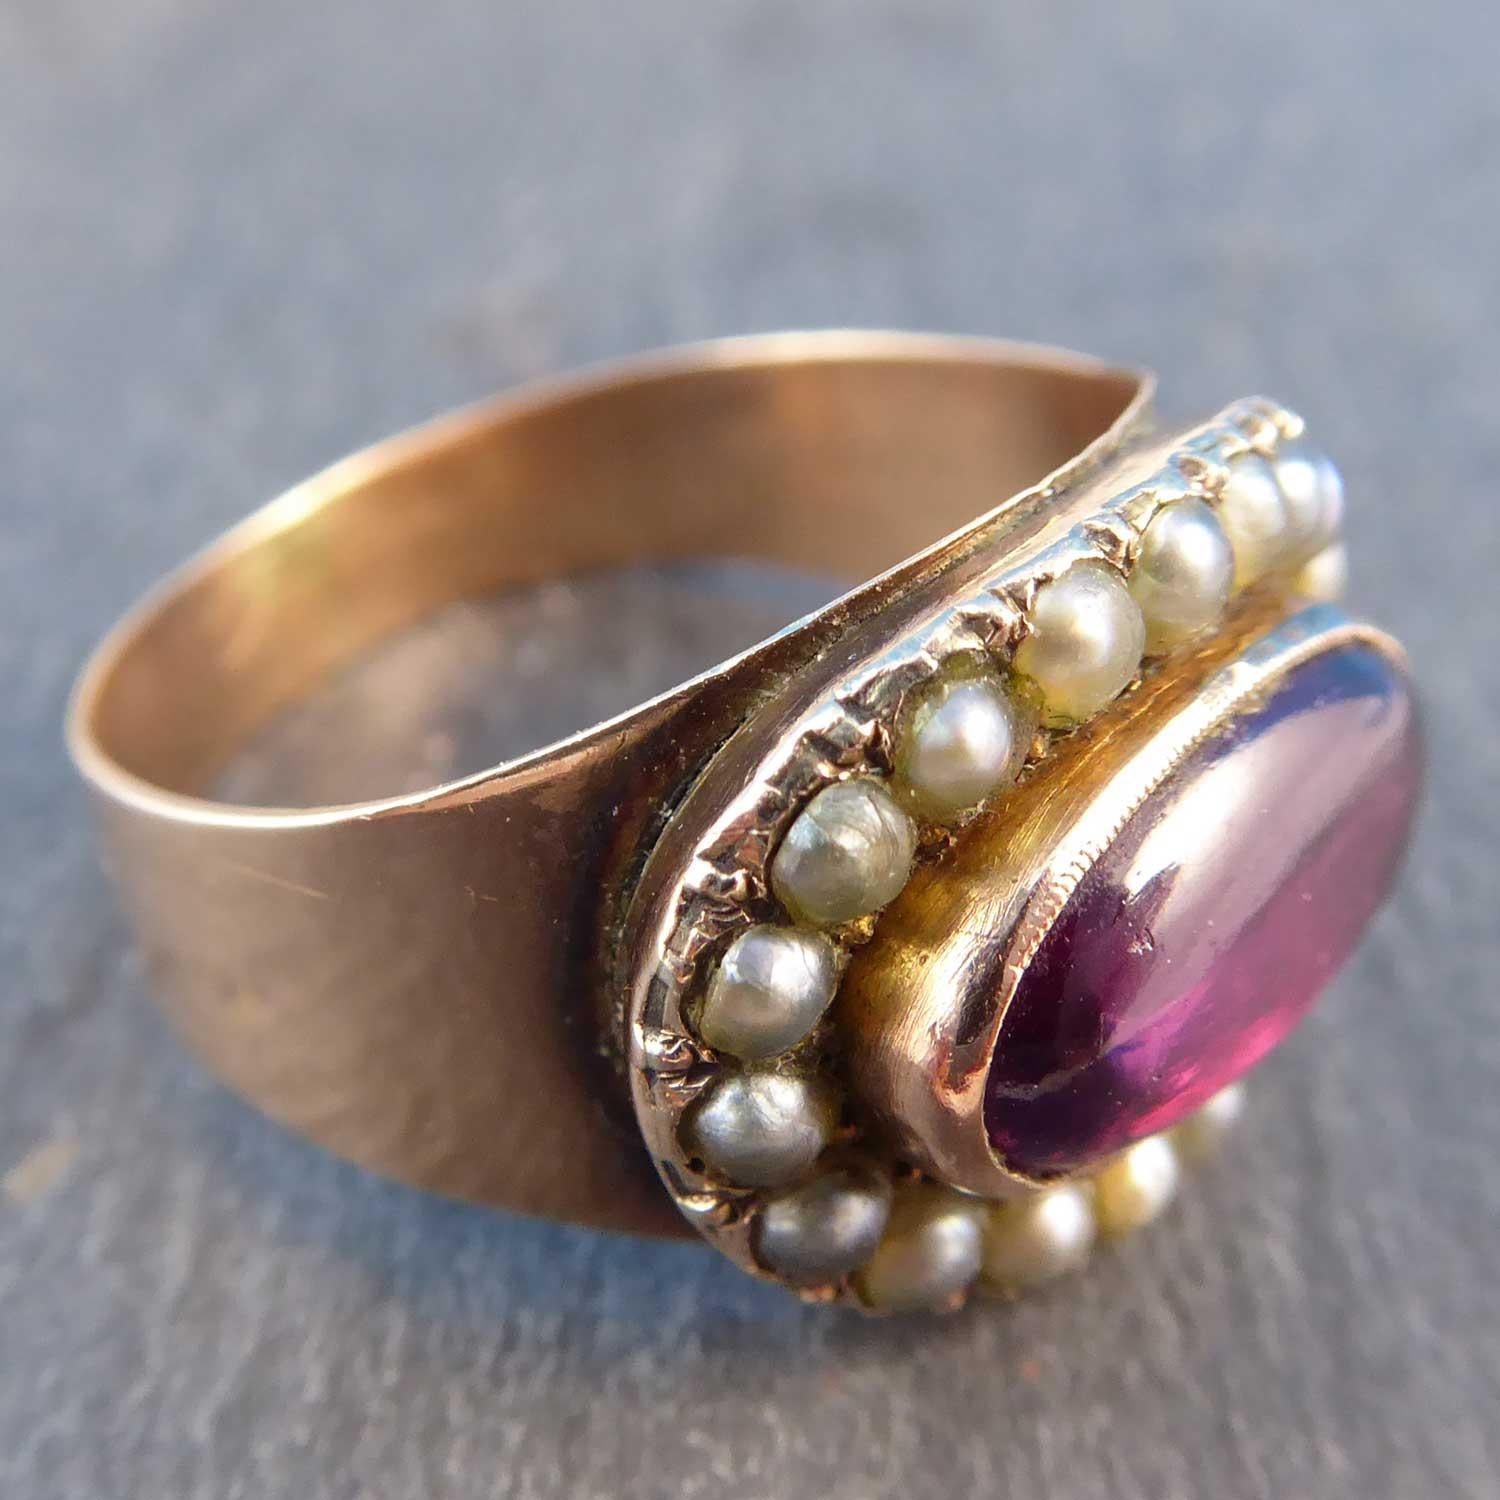 Antique Georgian Style Garnet and Pearl Cluster Ring, circa 1850s (Ovalschliff)